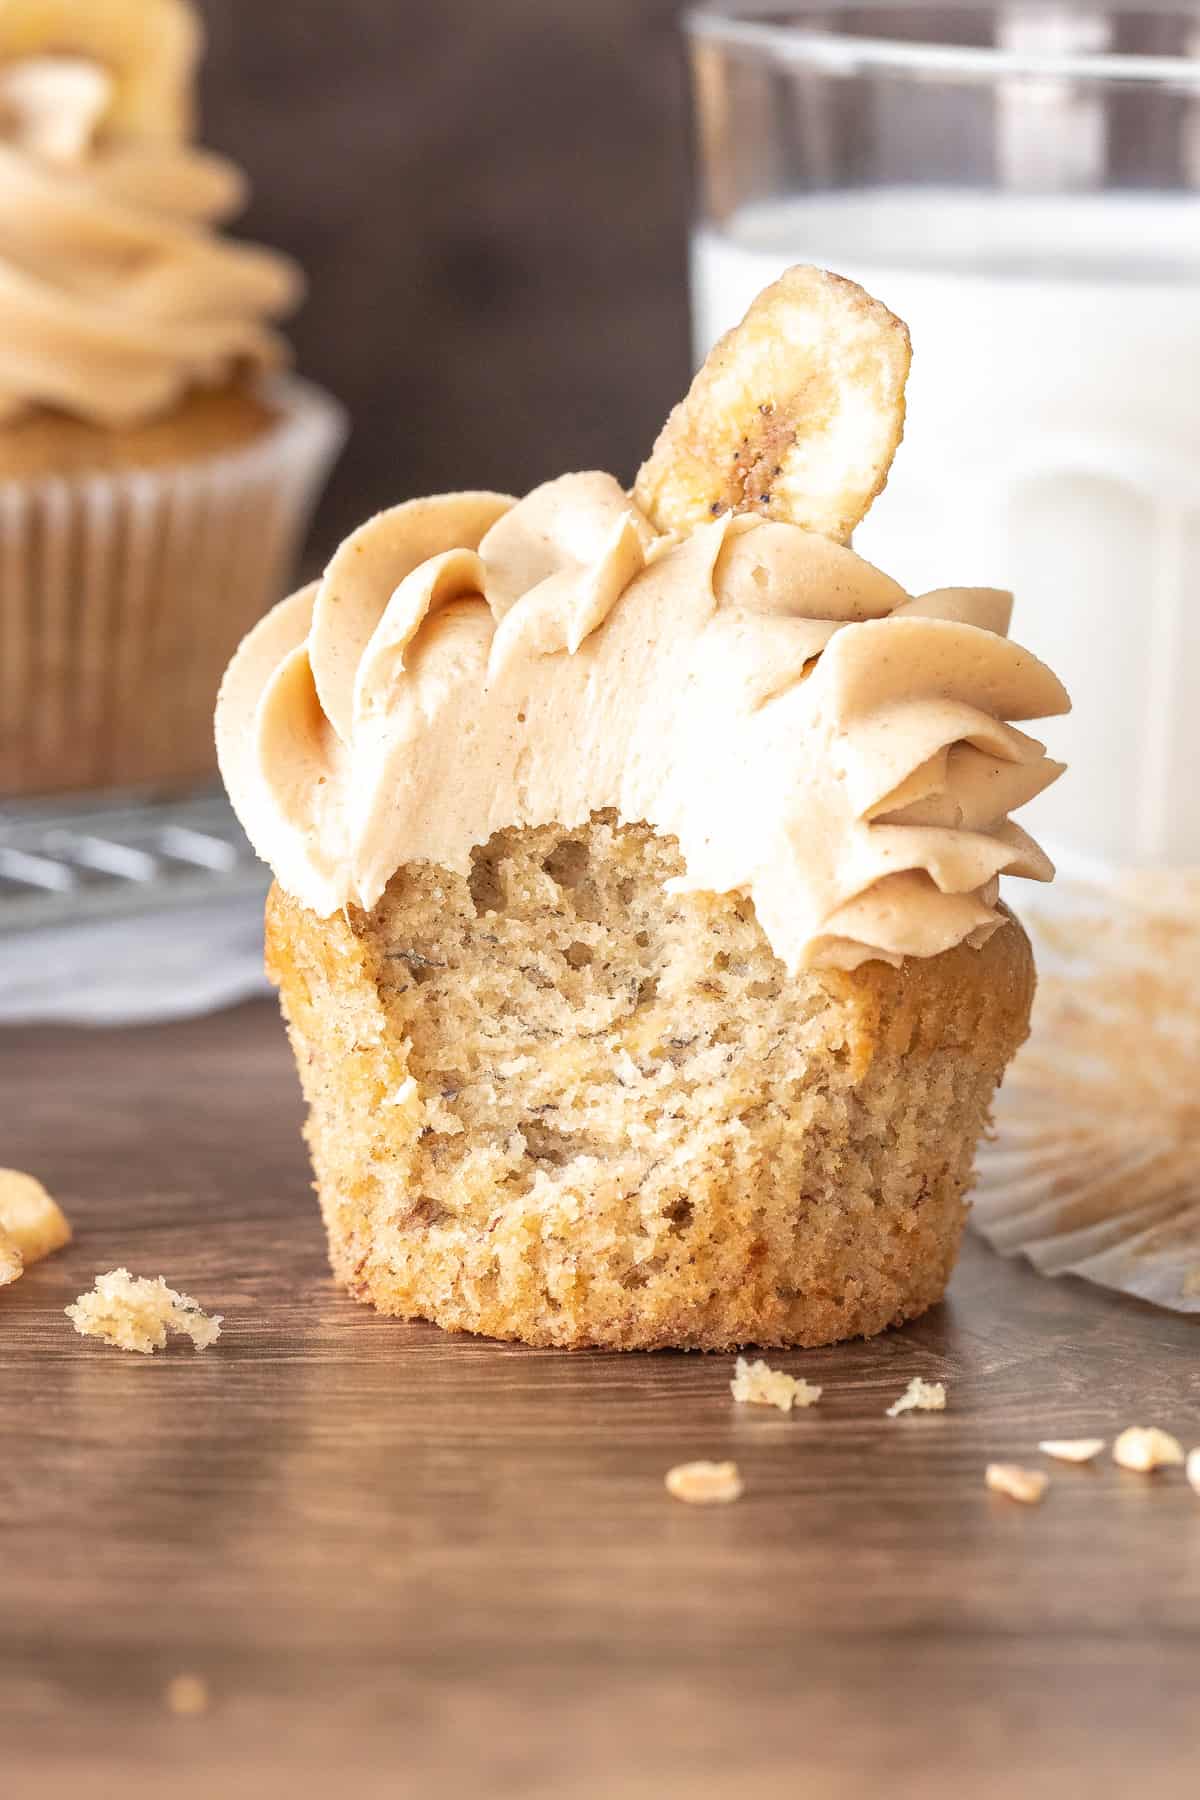 Cupcake topped with frosting and a banana chip with a bite taken out